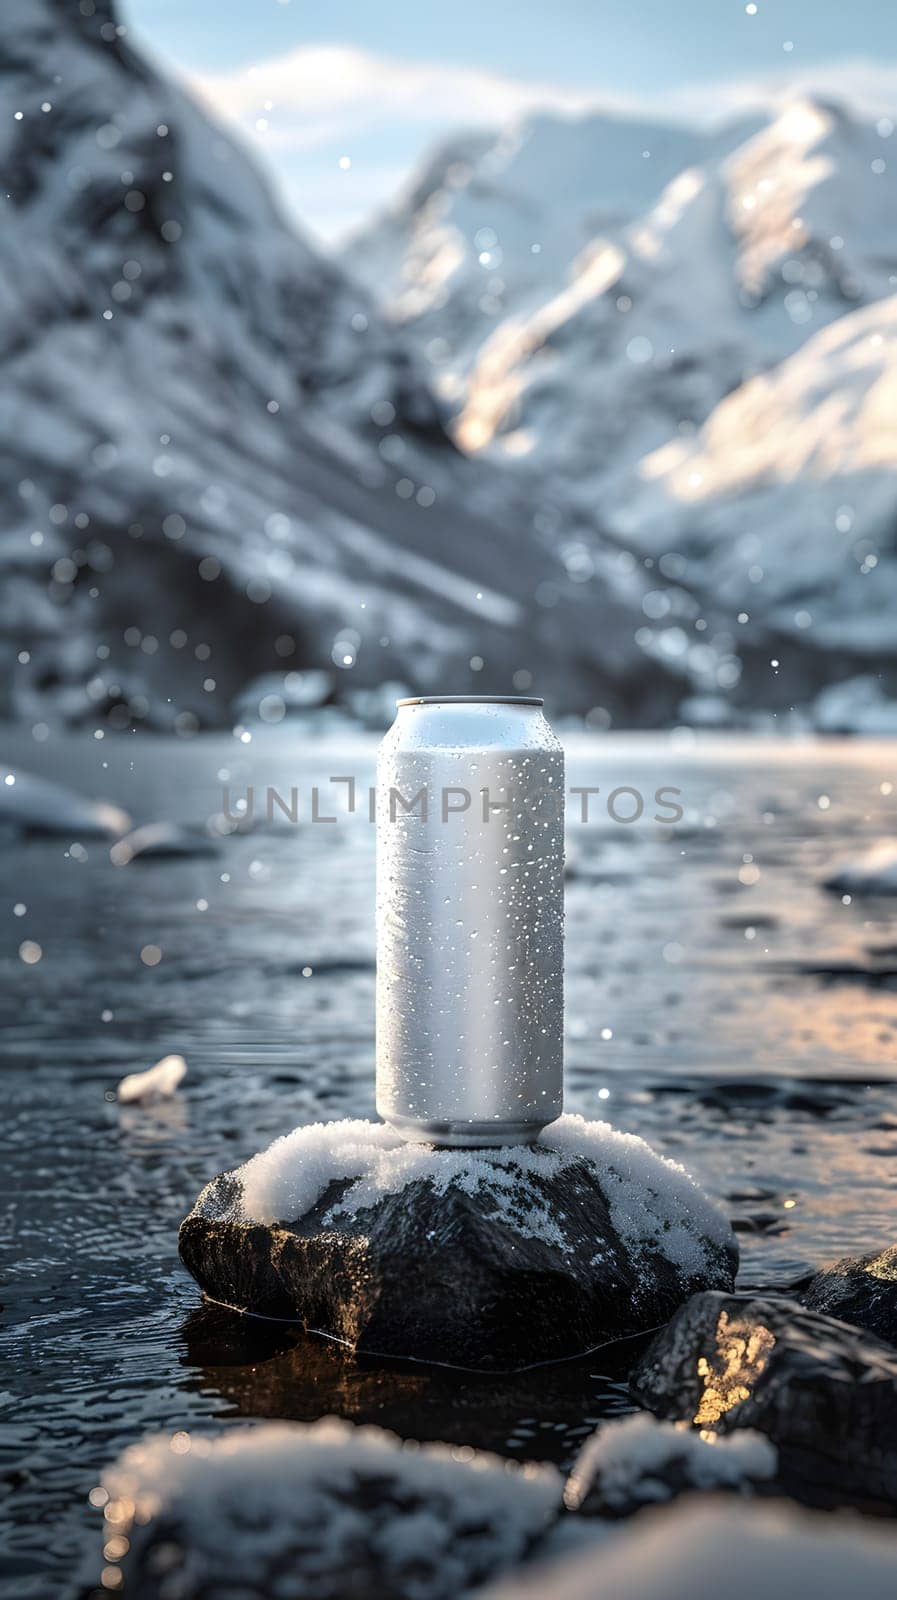 Soda can rests on rock in river amidst natural landscape by Nadtochiy